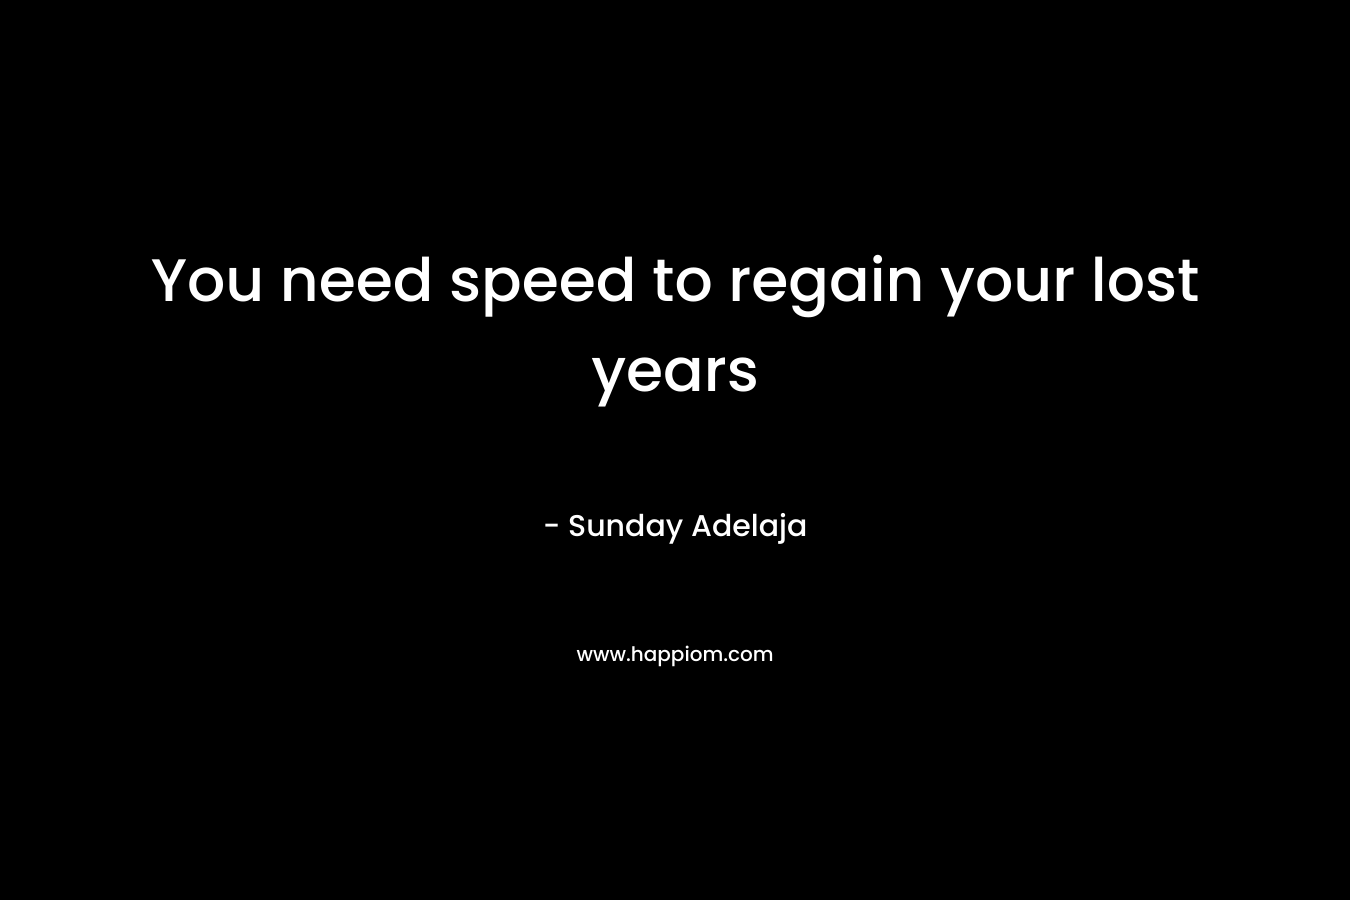 You need speed to regain your lost years